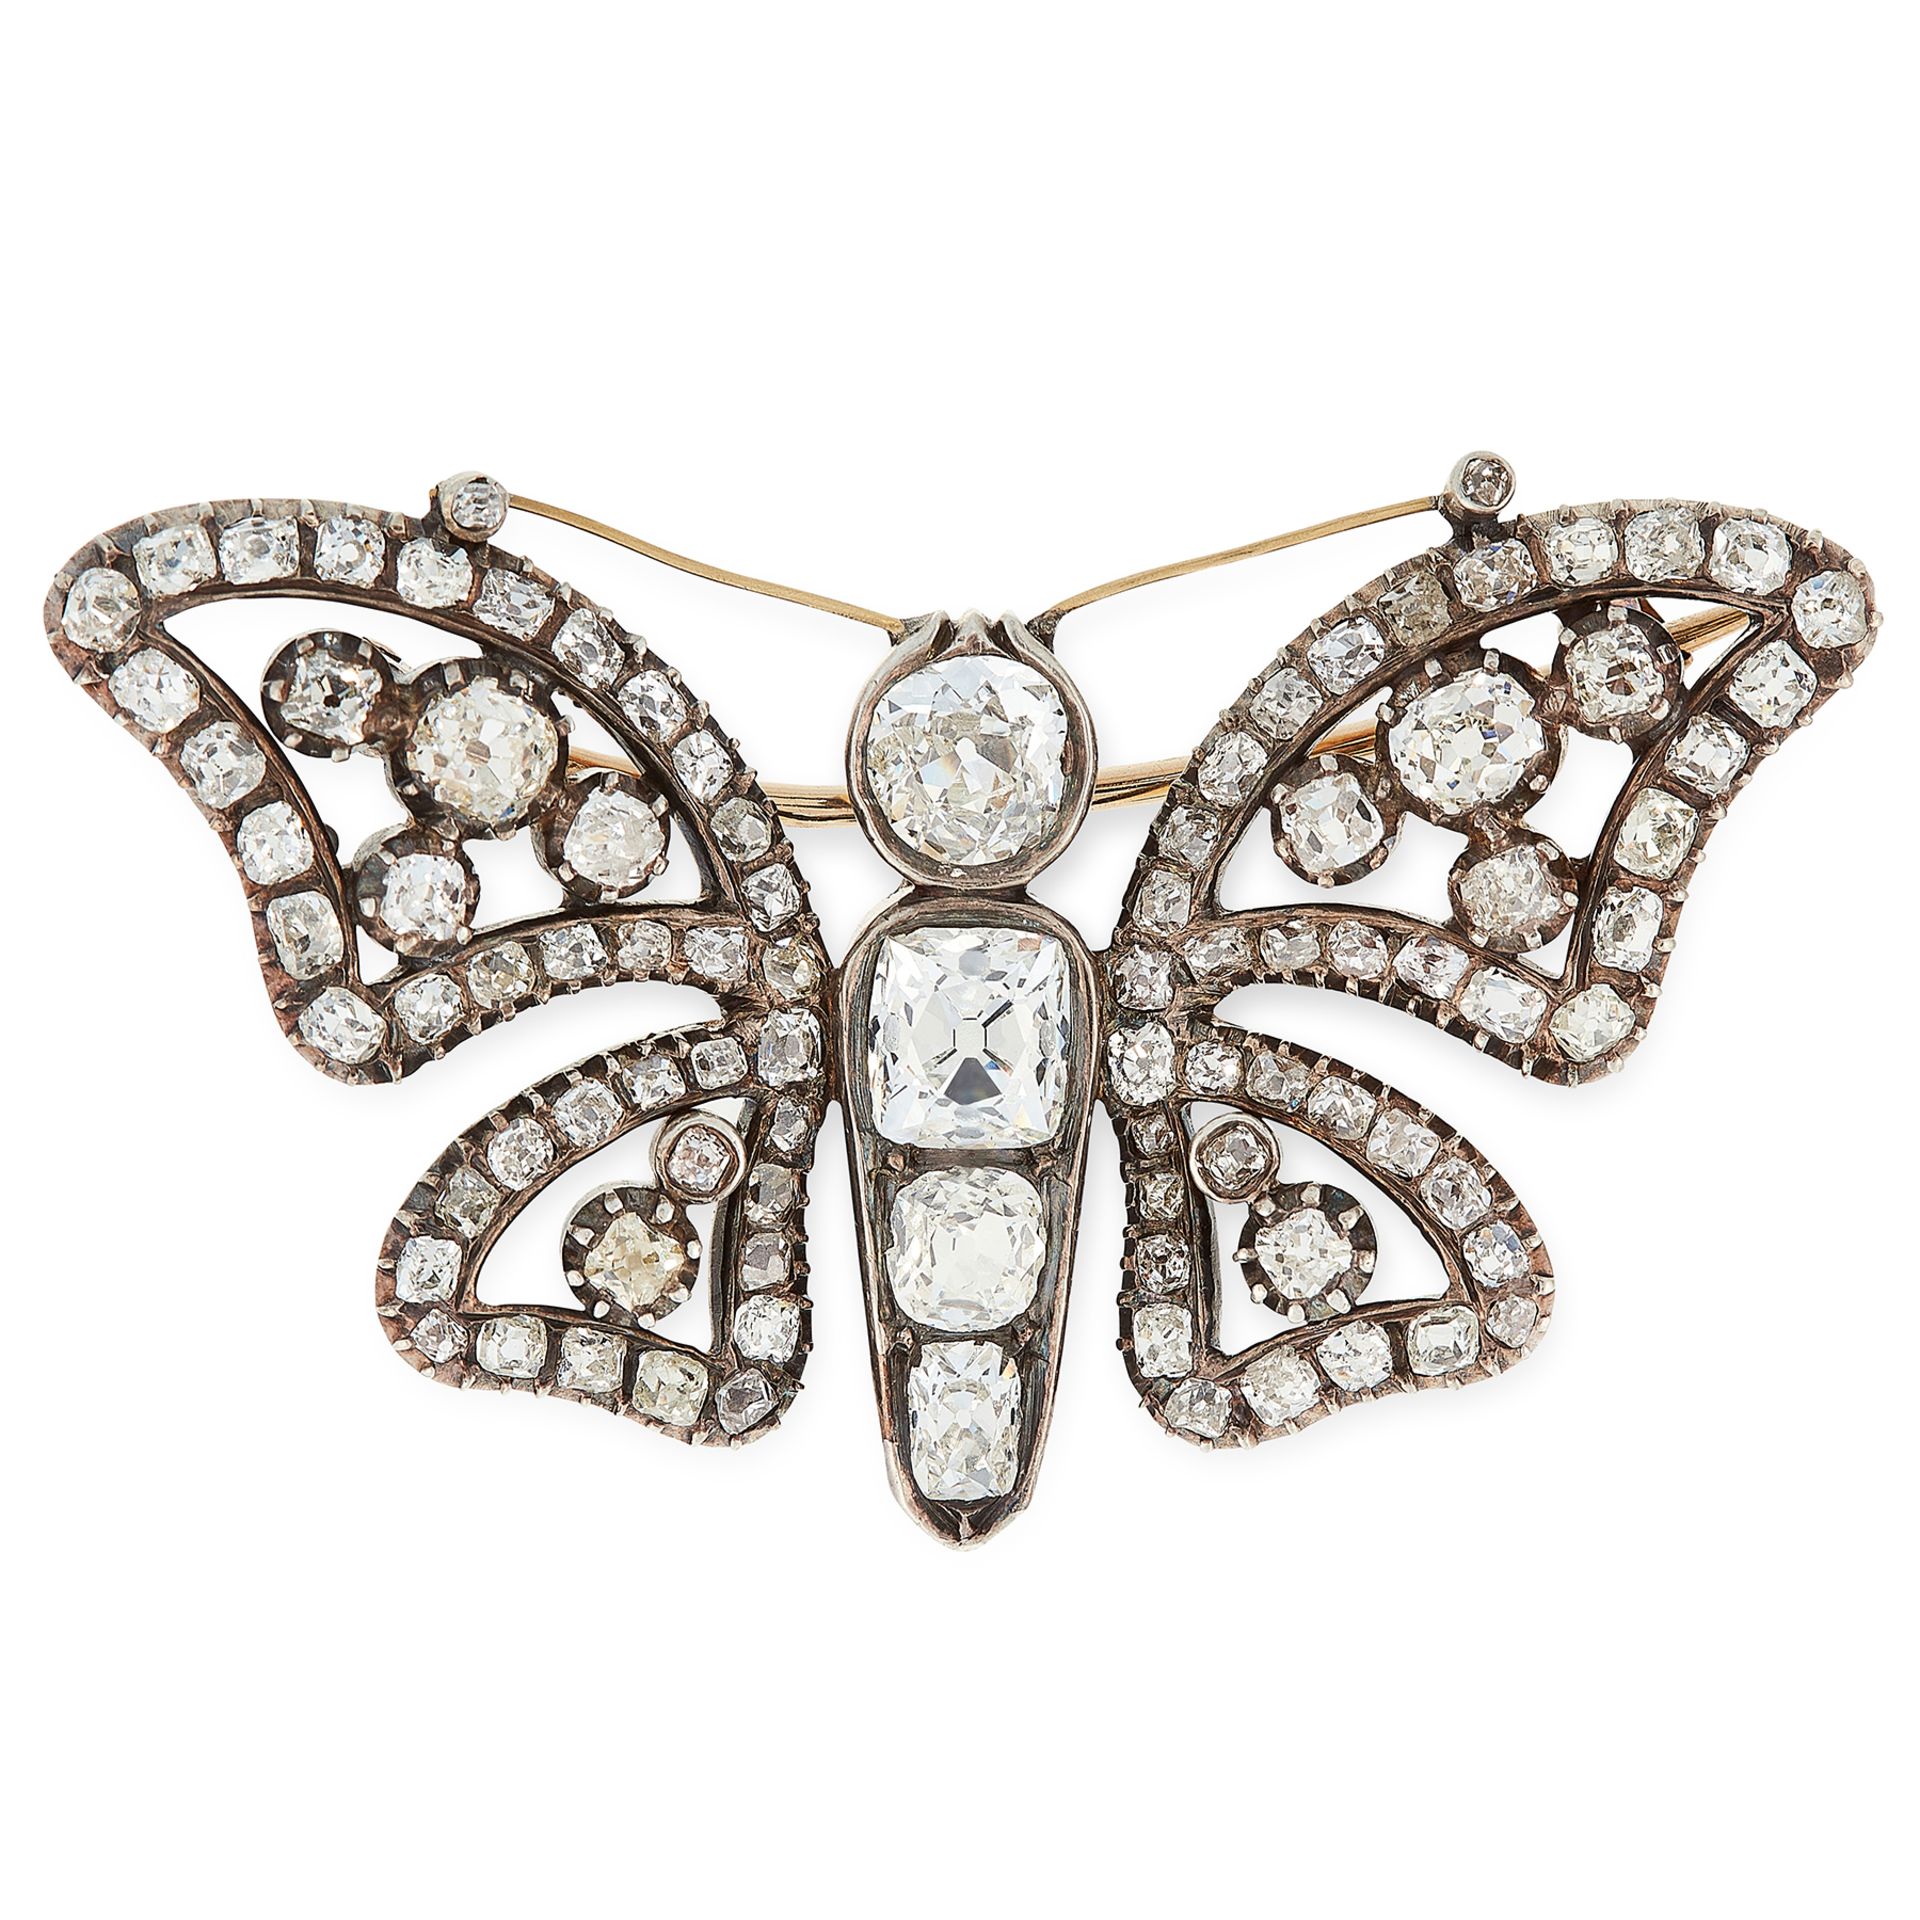 AN ANTIQUE DIAMOND BUTTERFLY BROOCH, 19TH CENTURY in yellow gold and silver, designed as a